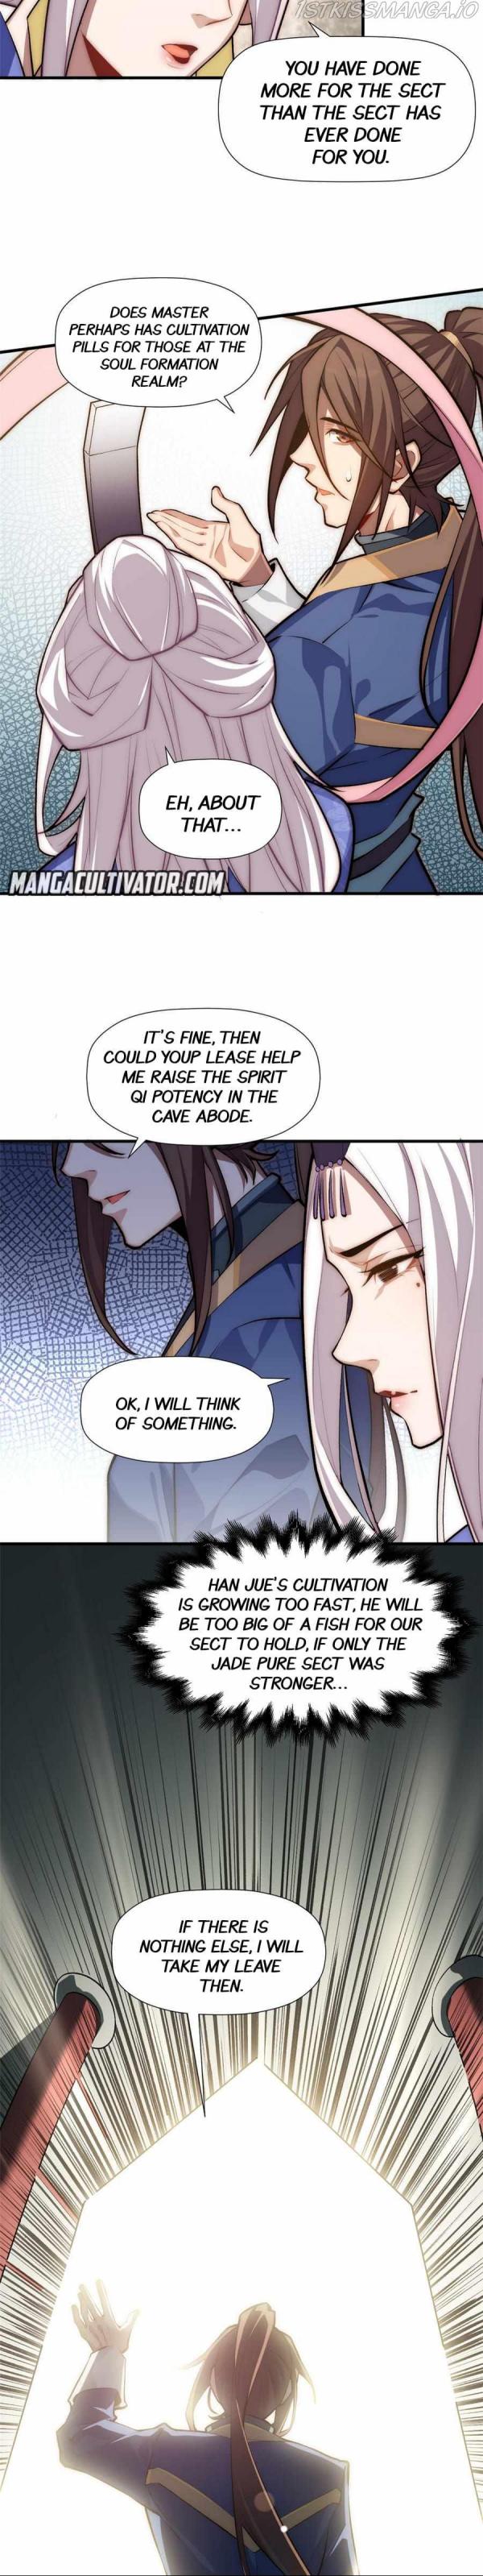 Top Tier Providence: Secretly Cultivate for a Thousand Years Ch.40 Page 5 -  Mangago